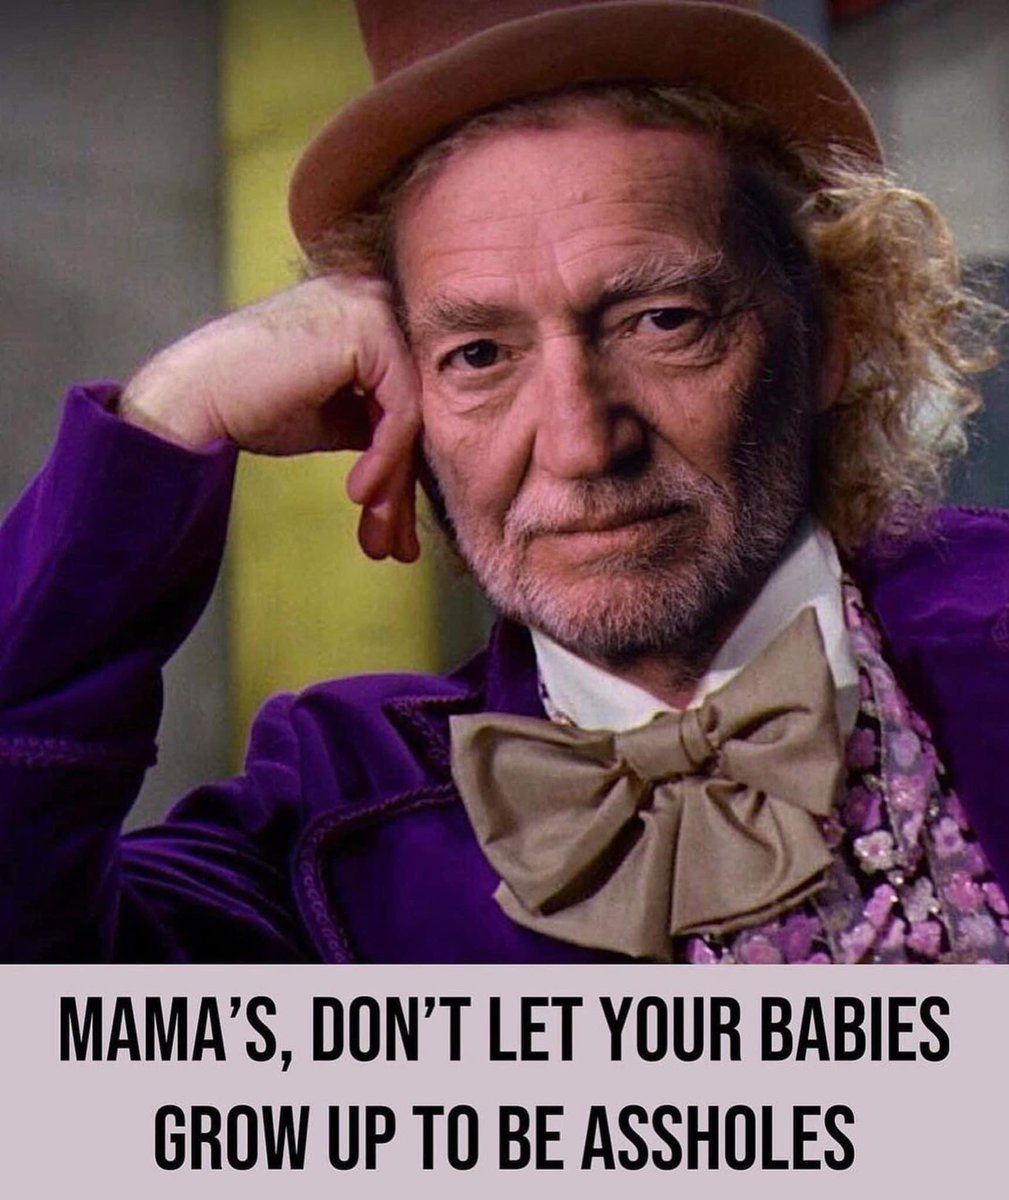 #Willie #WillieNelson #WillieWonka #WWWD #Dontbeanasshole #OutlawCountry @WilliesReserve